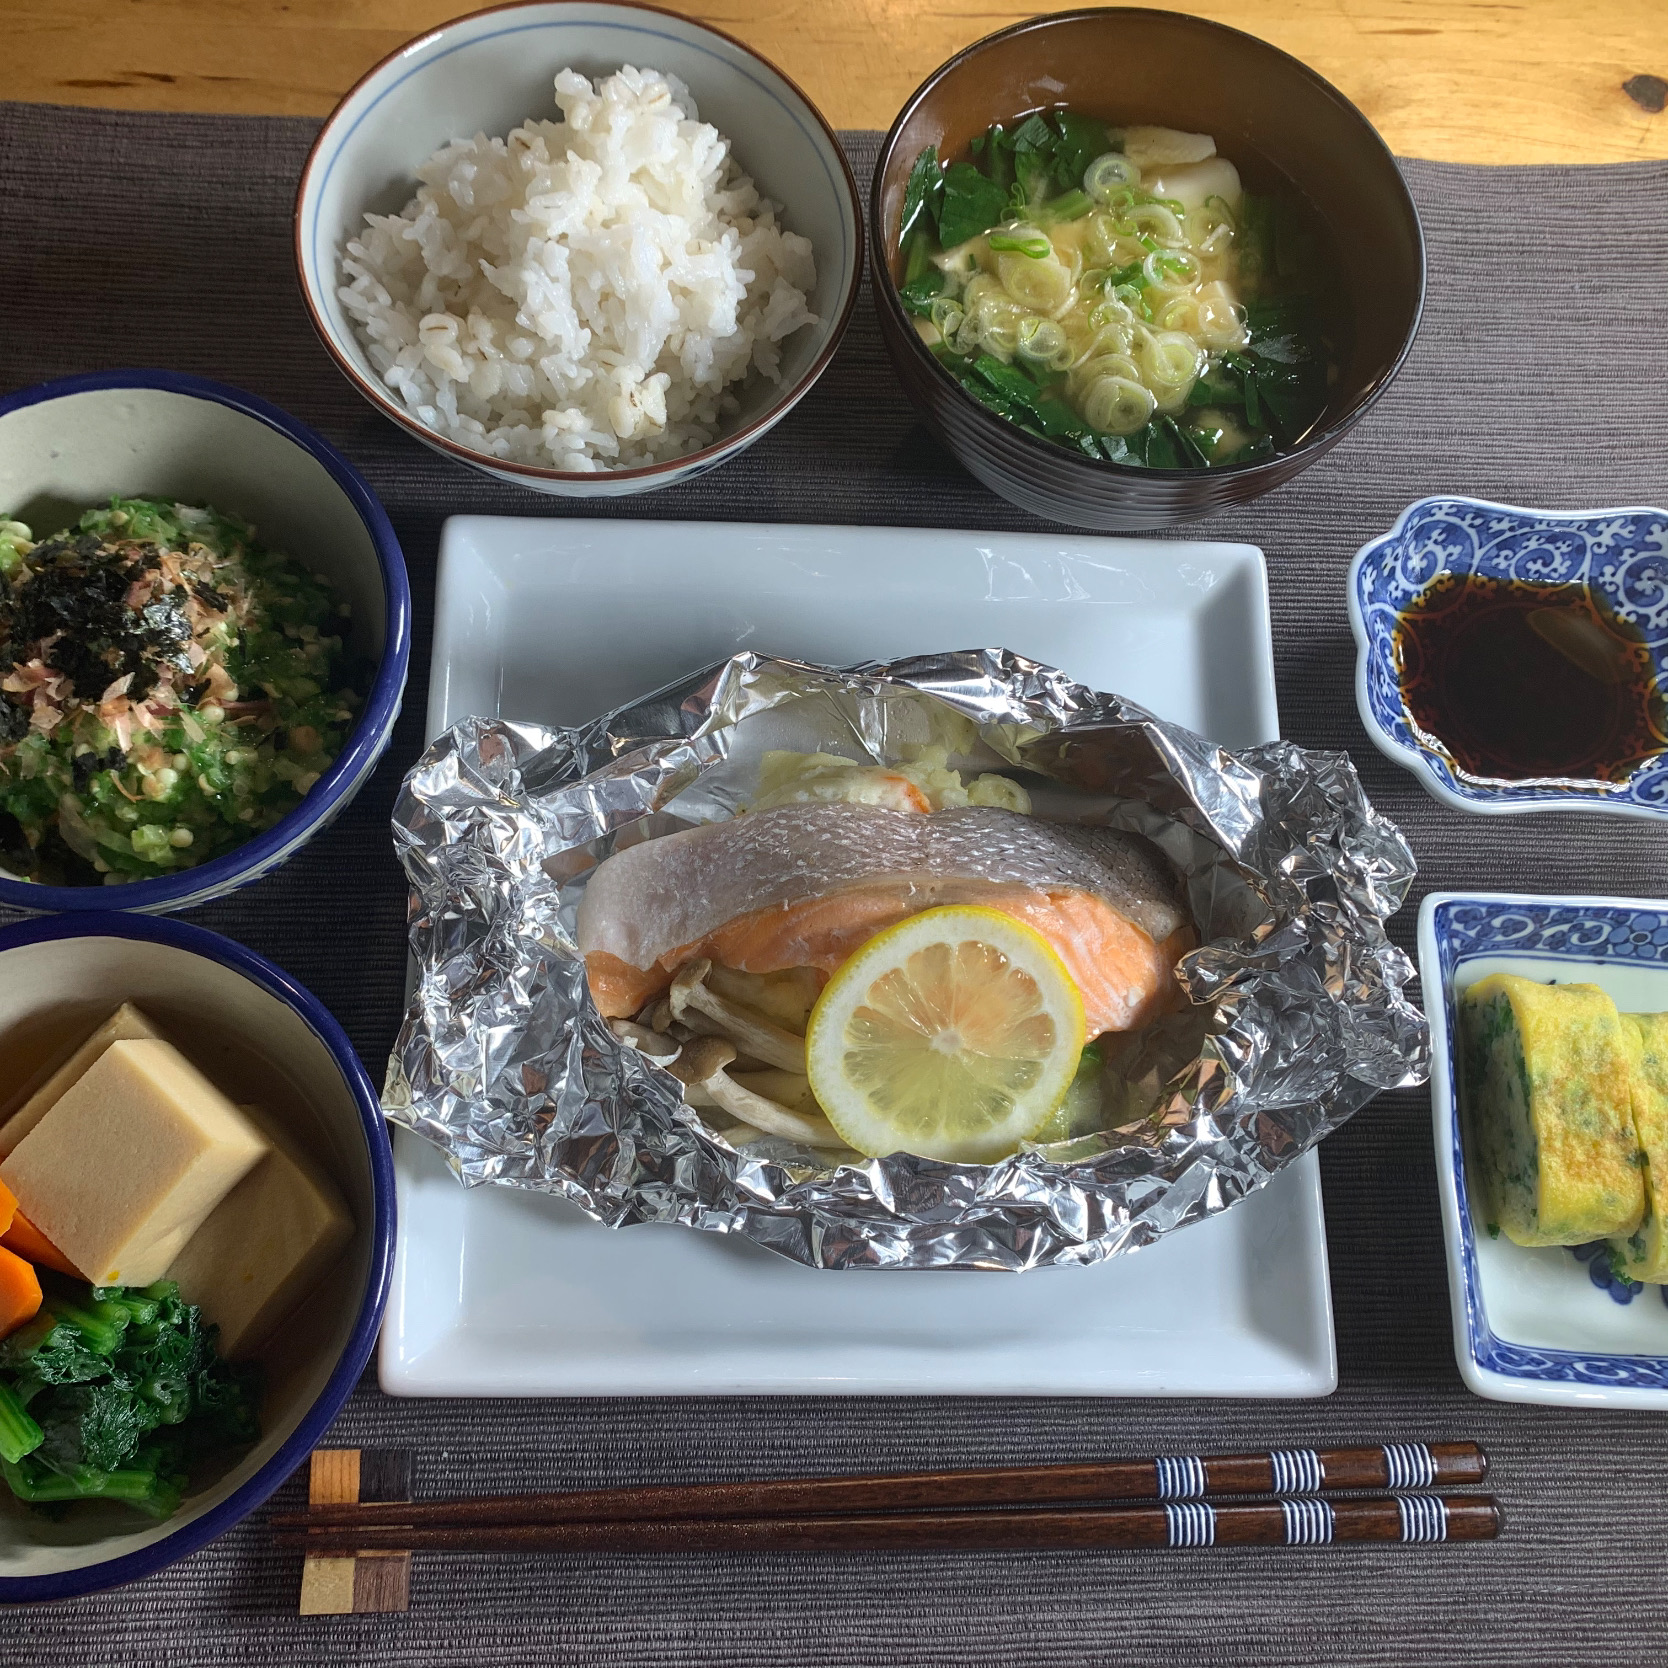 Grilled Salmon & Potato Salad in Foil Packet (鮭とポテサラのホイル焼き)